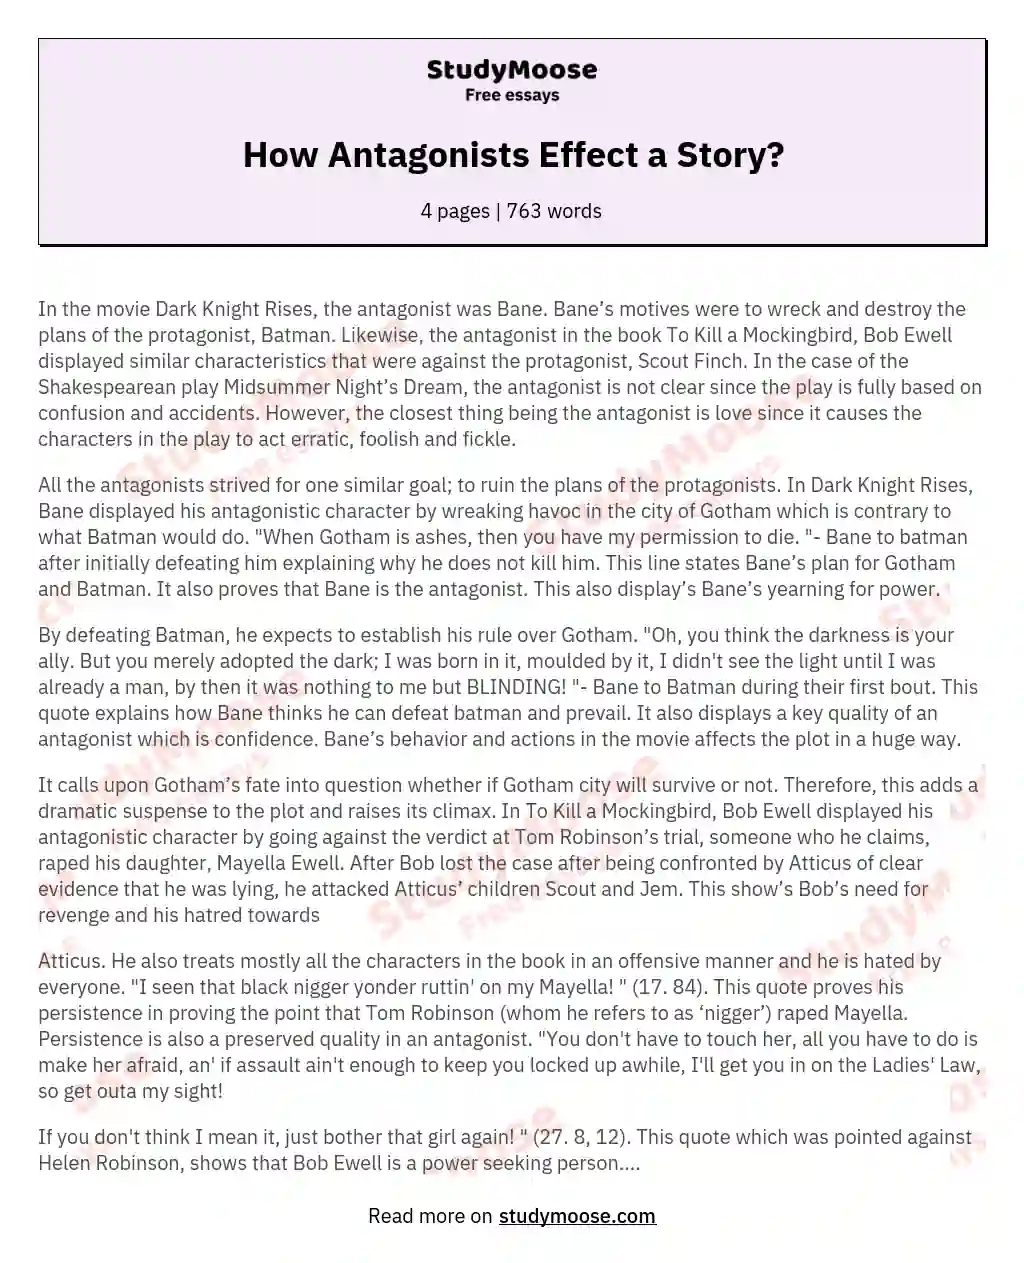 How Antagonists Effect a Story? essay